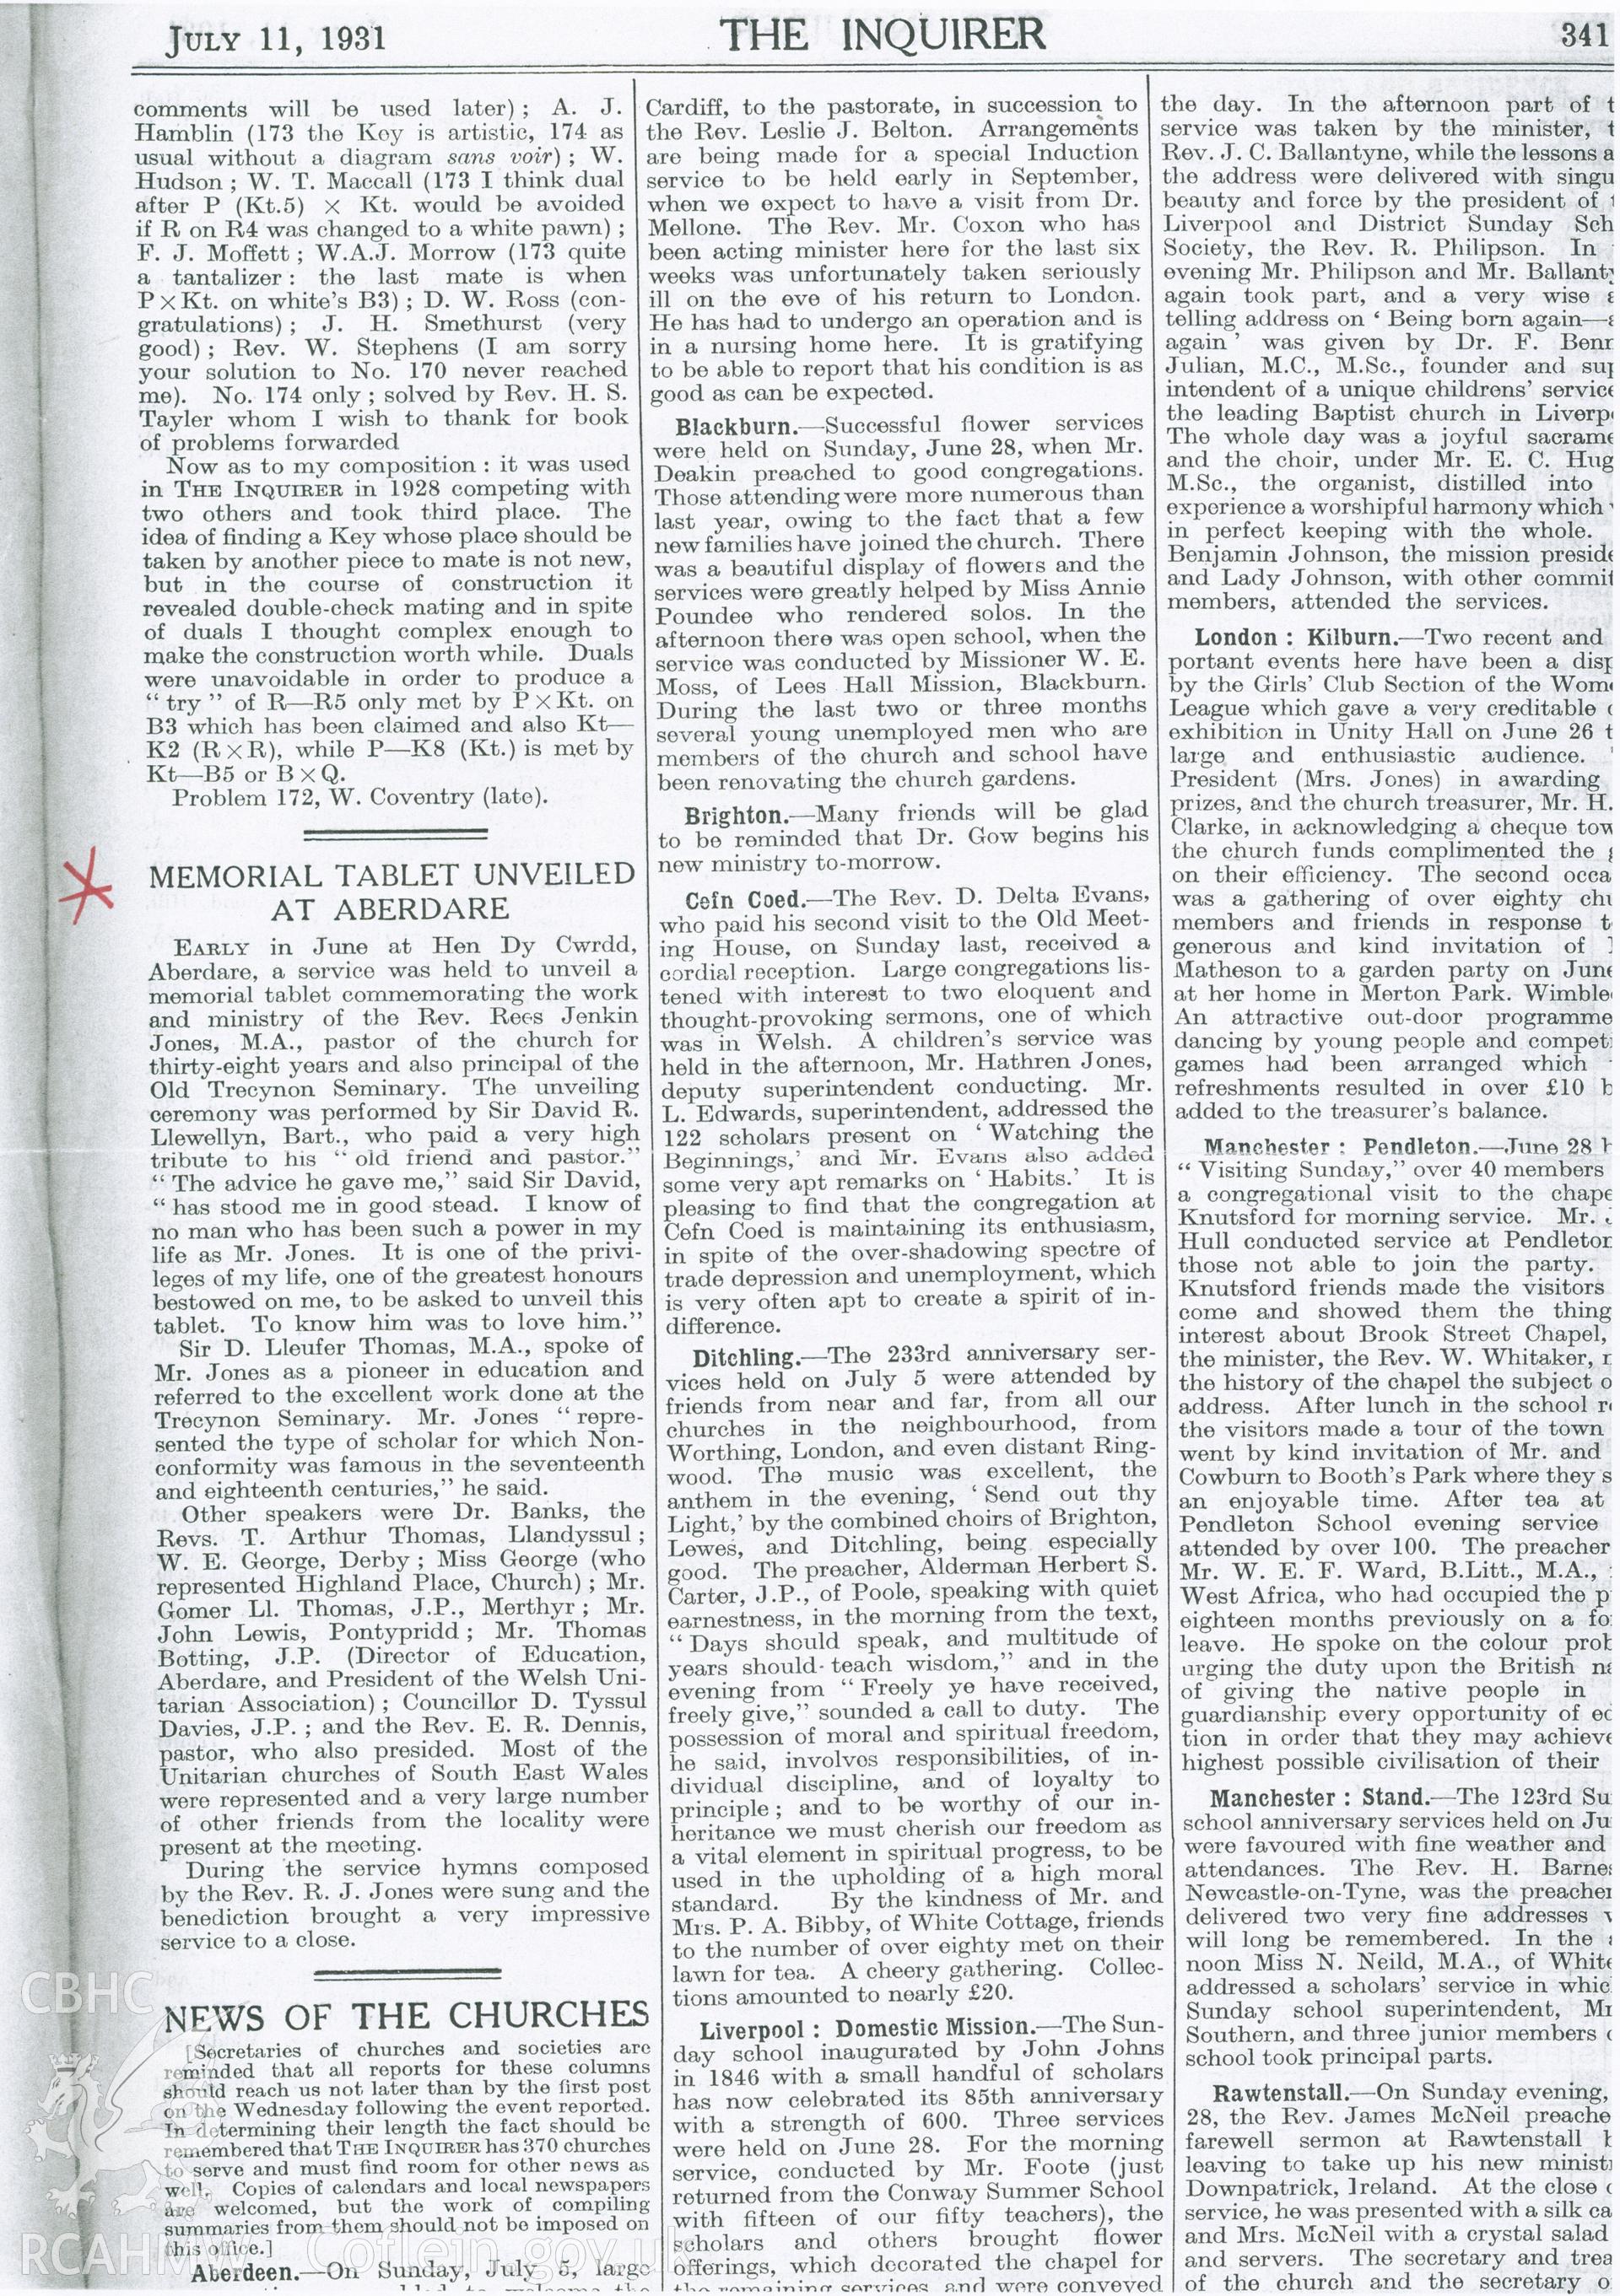 Copy of 'the Inquirer' 11th July 1931. Highlighted article reports on the unveiling of a memorial at Hen Dy Cwrdd to commemorate the work and ministry of the Rev. Rees Jenkin Jones, M.A. Donated to the RCAHMW during the Digital Dissent Project.